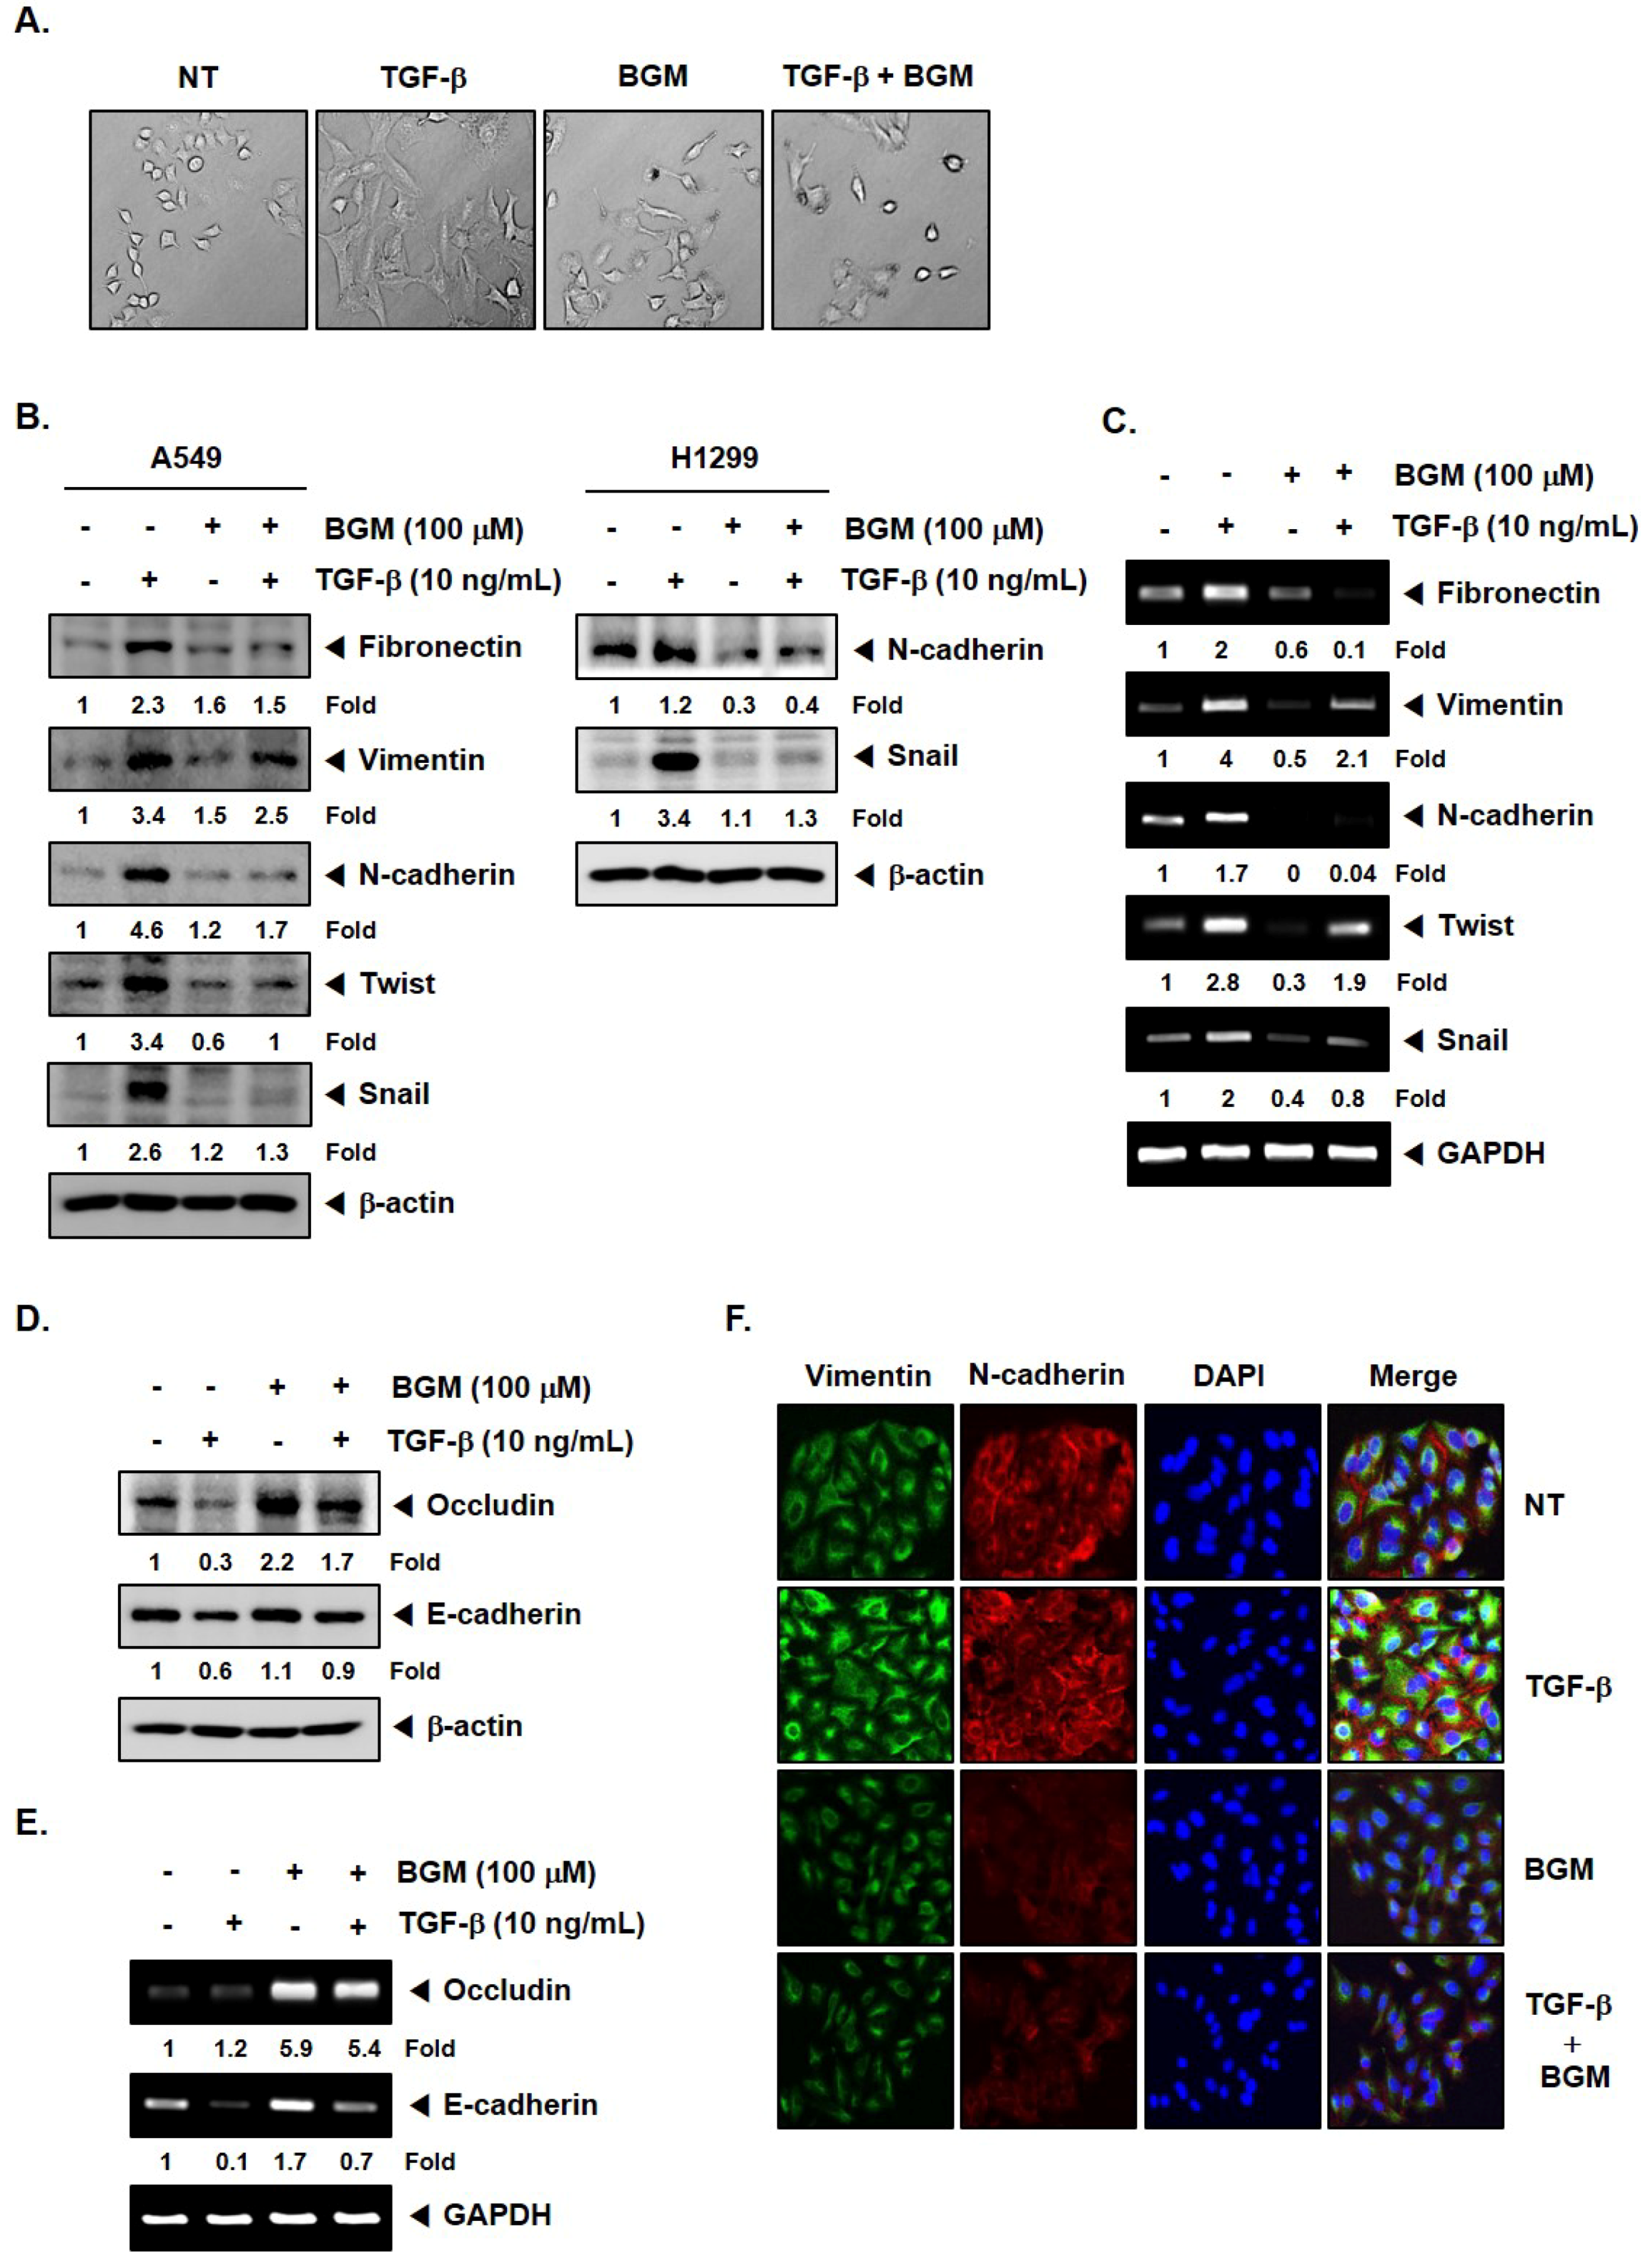 Molecules Free Full Text Bergamottin Suppresses Metastasis Of Lung Cancer Cells Through Abrogation Of Diverse Oncogenic Signaling Cascades And Epithelial To Mesenchymal Transition